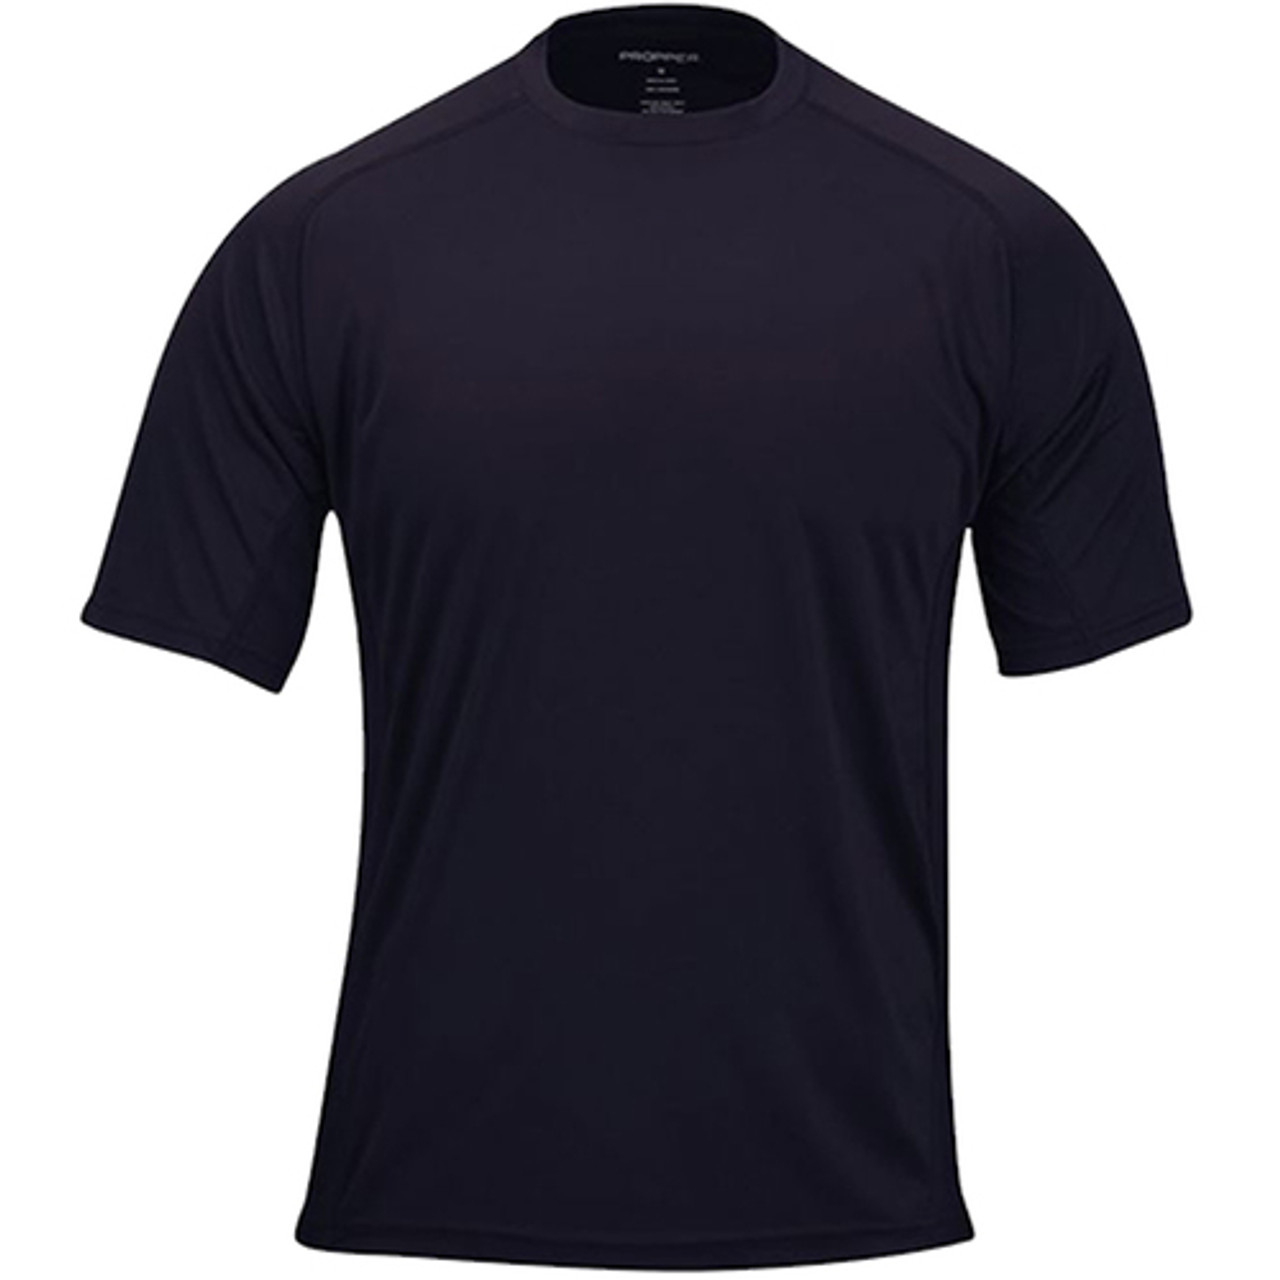 Propper System Short-Sleeve Athletic T-Shirt, Zip Pocket, 100% Polyester, Moisture and Odor Management, antimicrobial finish, available in Black, Khaki, Navy, and Olive Green F5373